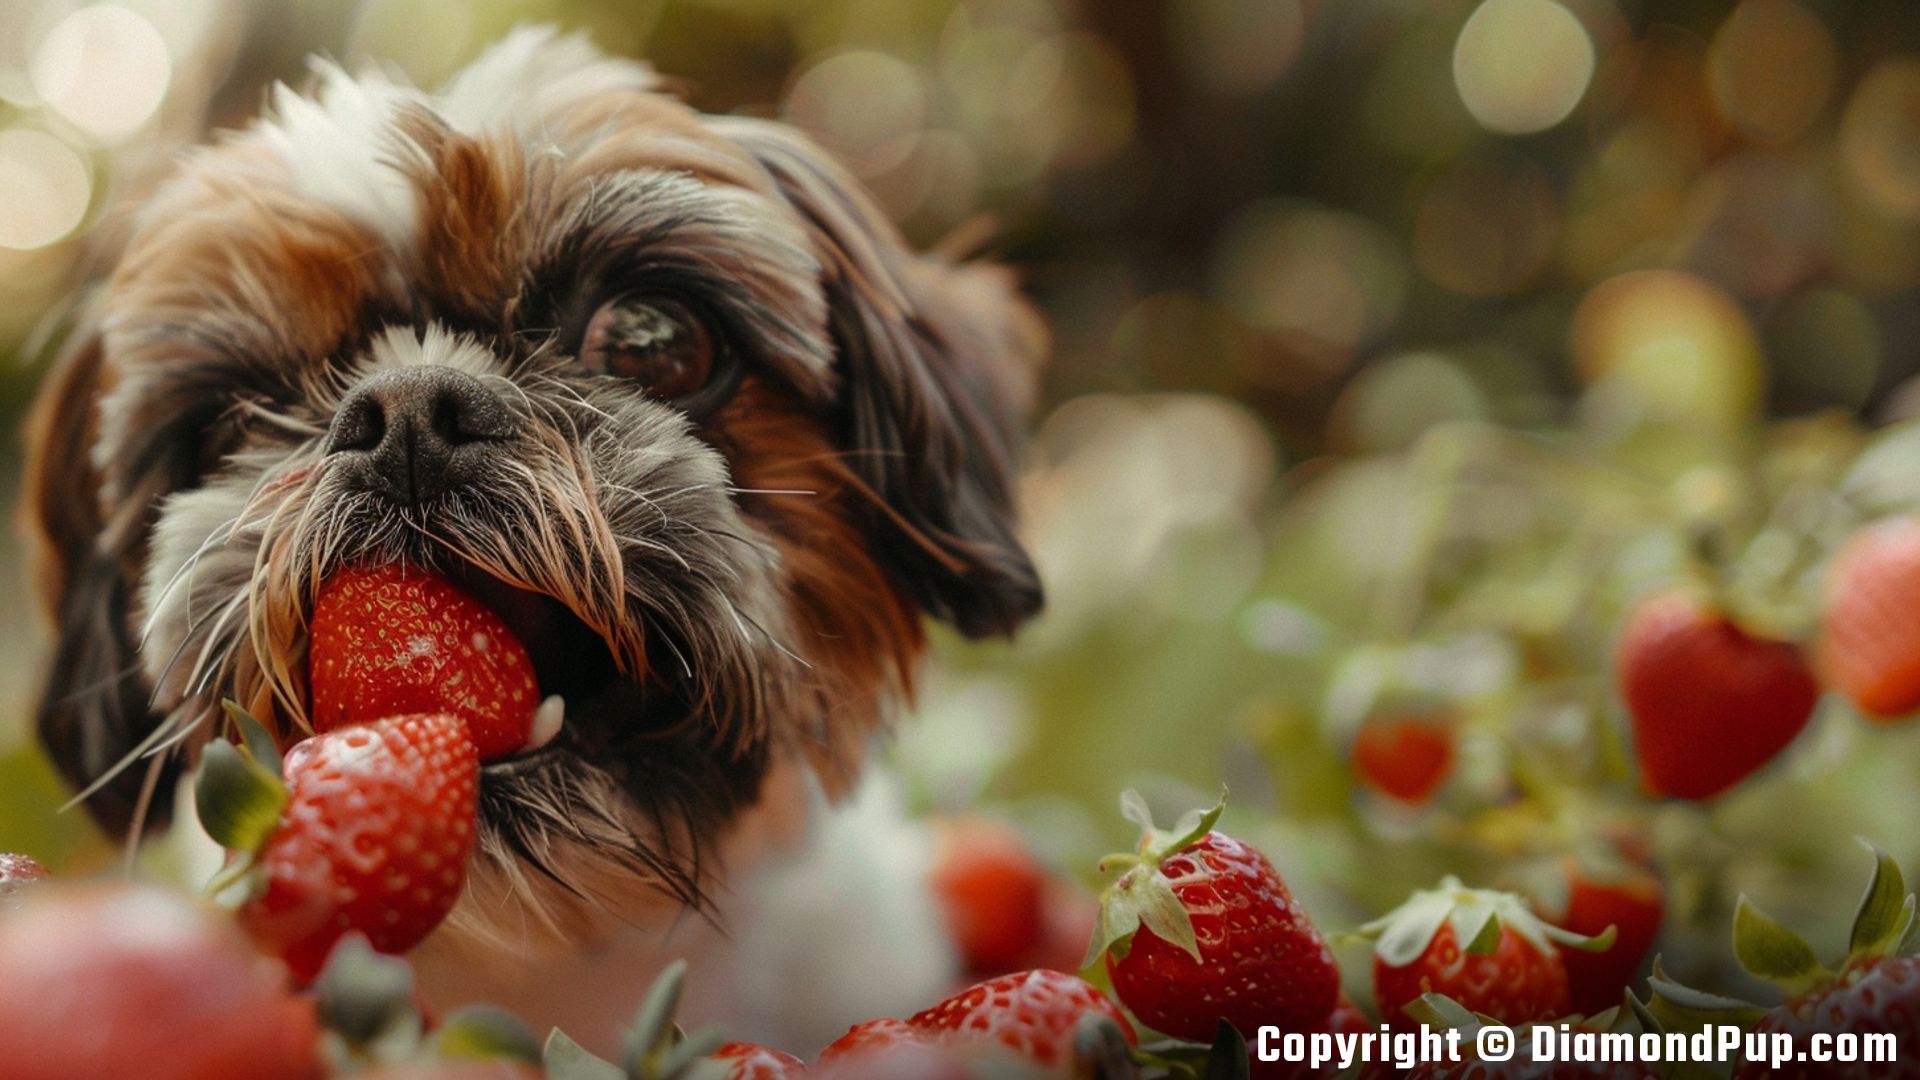 Image of a Happy Shih Tzu Snacking on Strawberries